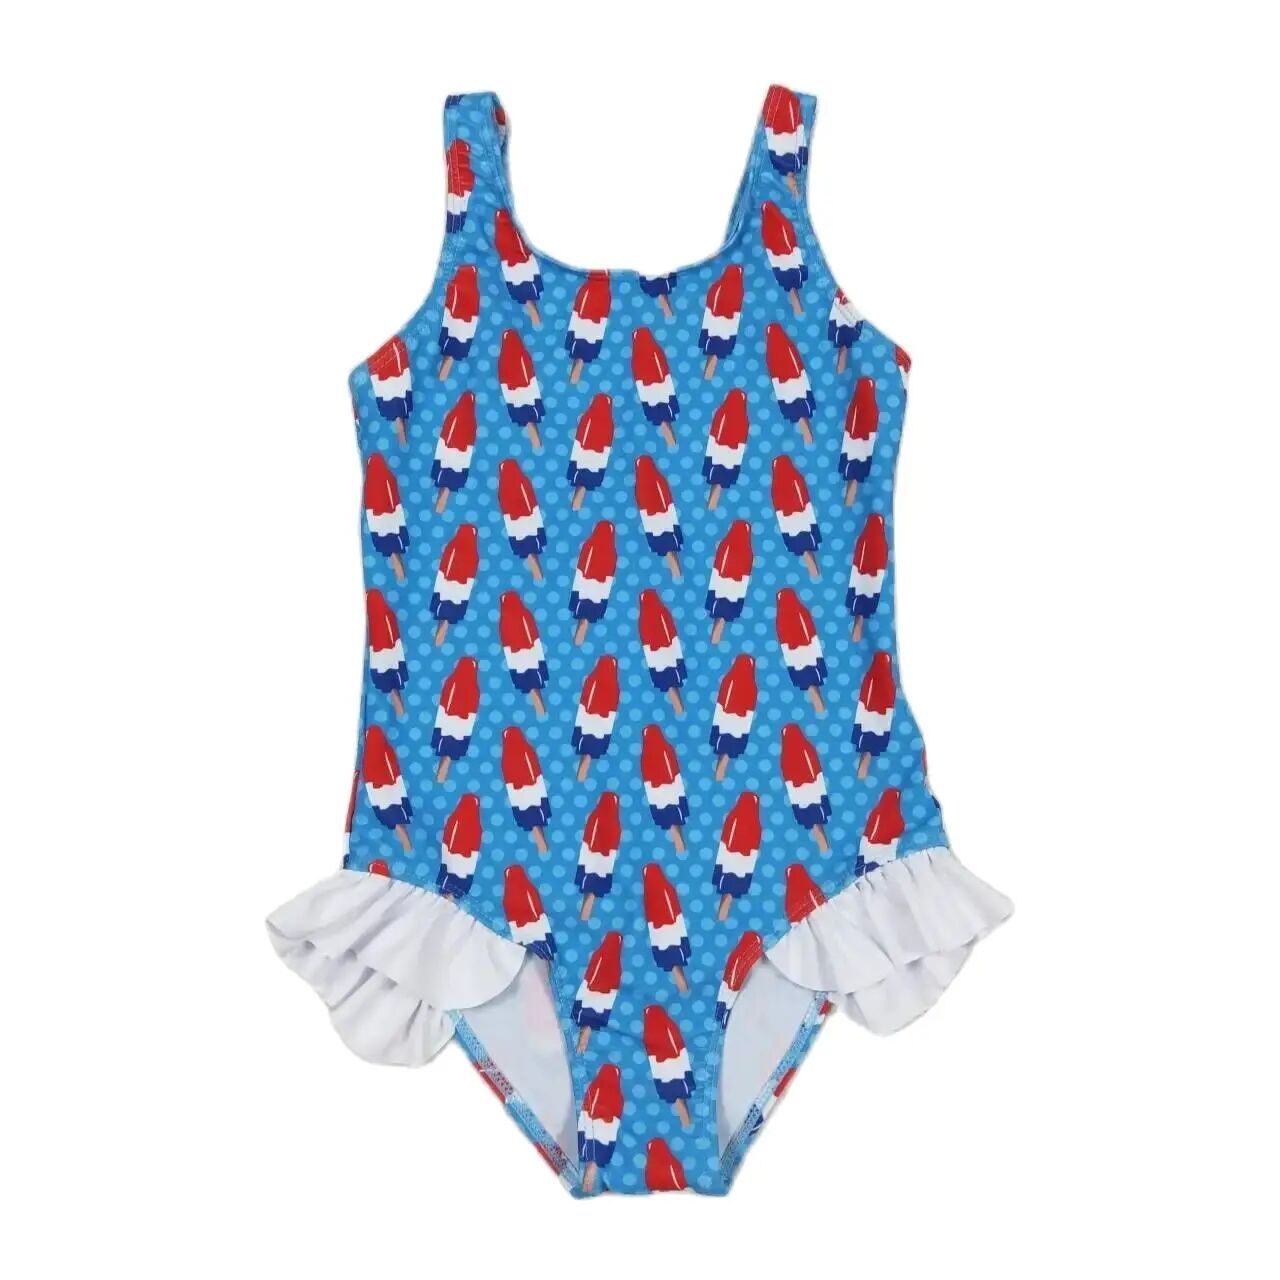 Girls One Piece Swimsuit - 4th of July Popsicle Ruffle Kids